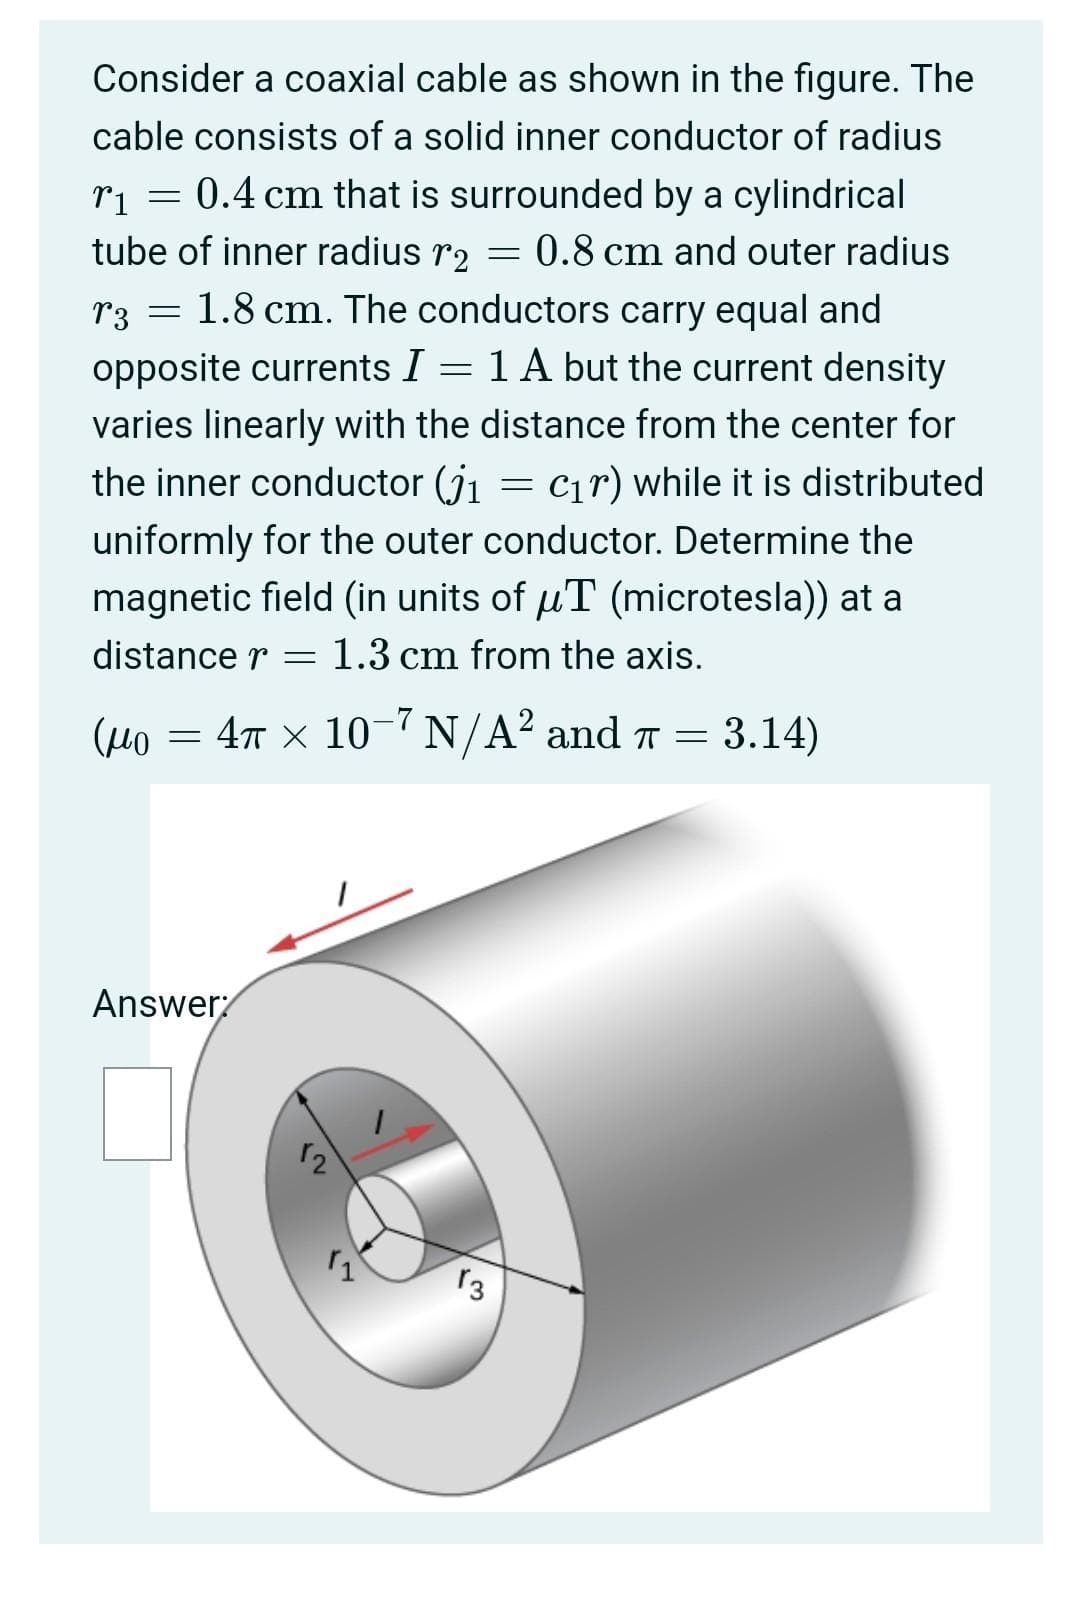 Consider a coaxial cable as shown in the figure. The
cable consists of a solid inner conductor of radius
ri = 0.4 cm that is surrounded by a cylindrical
tube of inner radius r2
0.8 cm and outer radius
r3 = 1.8 cm. The conductors carry equal and
opposite currents I = 1 A but the current density
varies linearly with the distance from the center for
the inner conductor (j1
C1r) while it is distributed
uniformly for the outer conductor. Determine the
magnetic field (in units of uT (microtesla)) at a
distance r
1.3 cm from the axis.
= 47 x 10-7 N/A? and T = 3.14)
Answer
